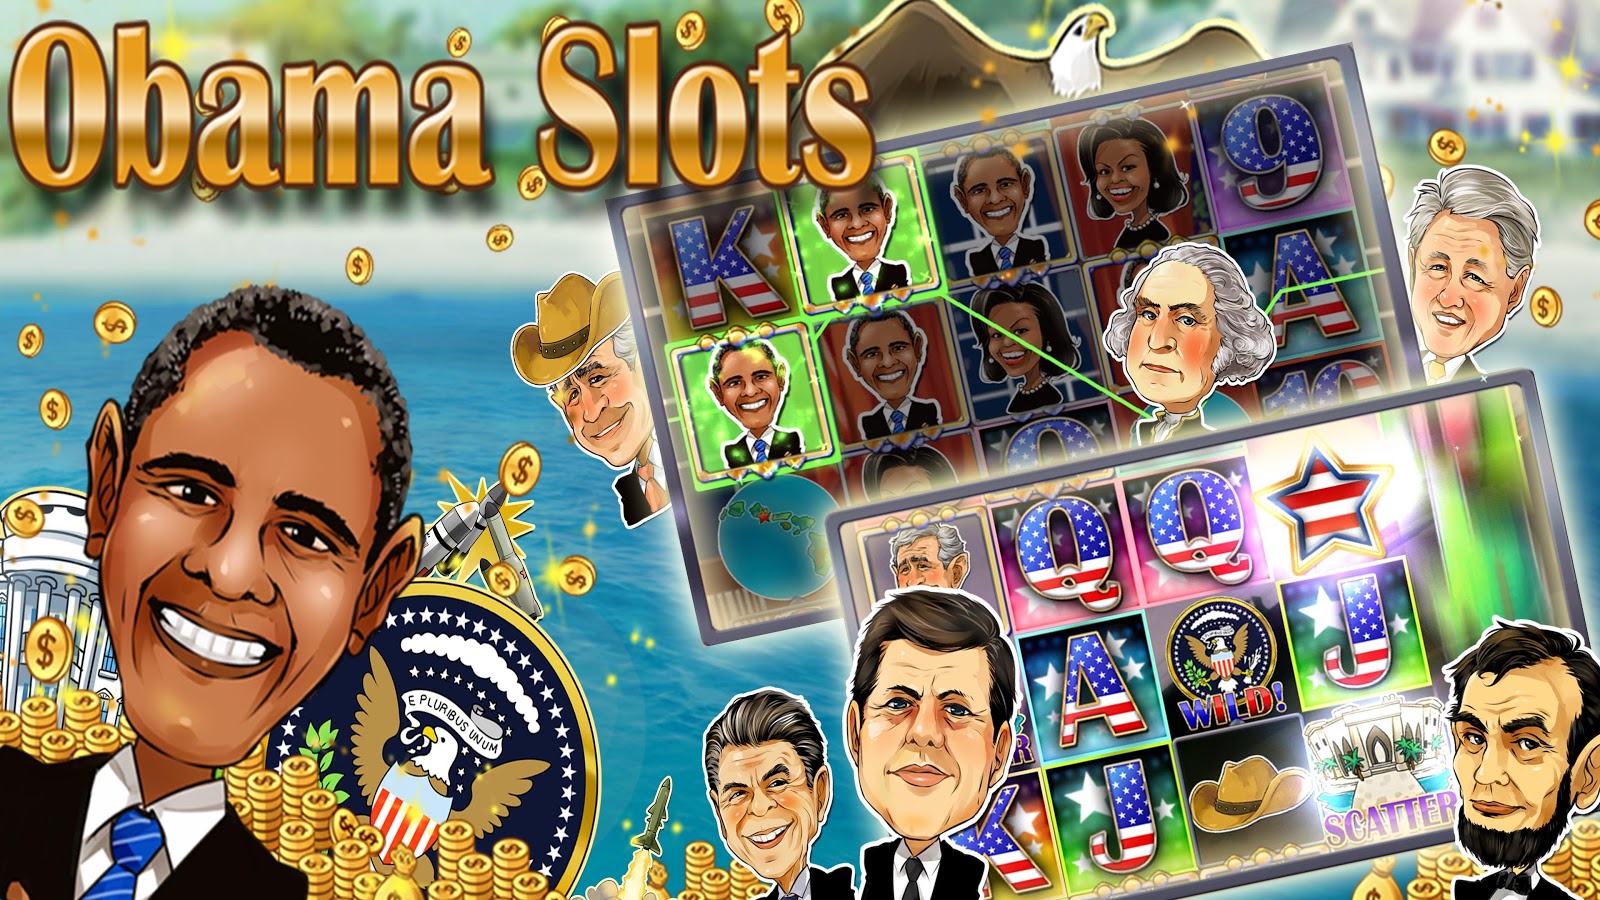 SLOTS: Obama Slot Machines! - Android Apps on Google Play1600 x 900